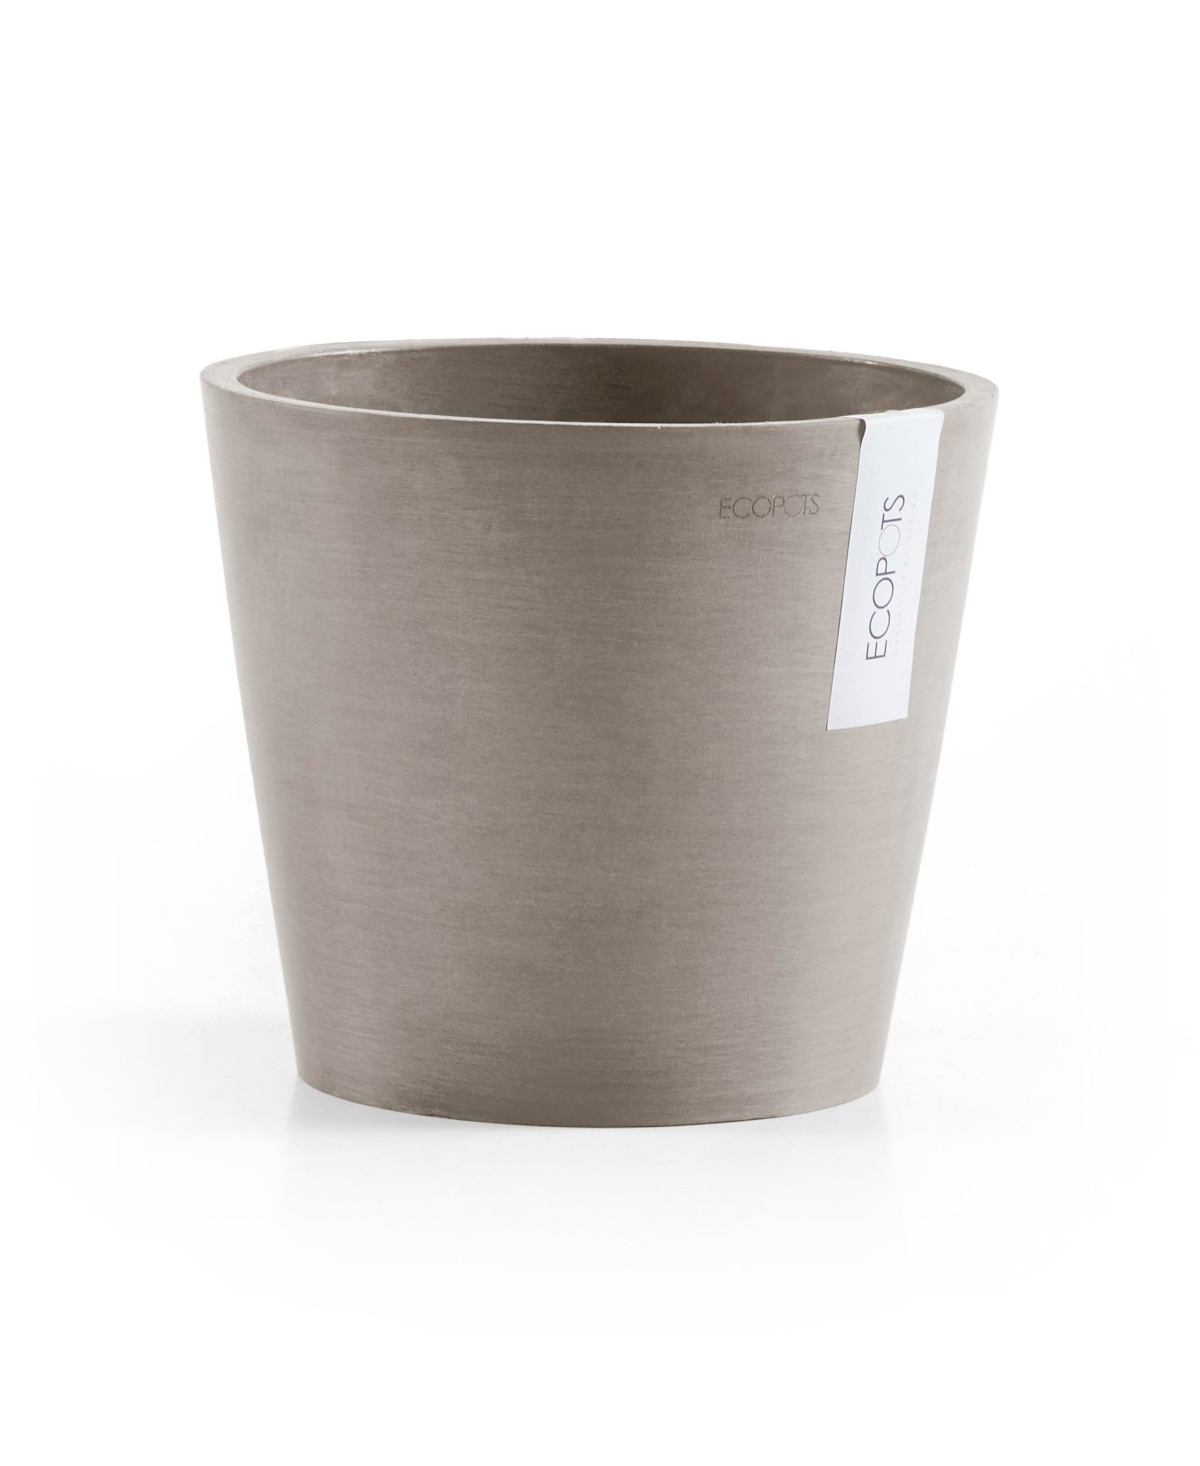 Eco pots Amsterdam Modern Round Indoor and Outdoor Planter, 12in - Taupe